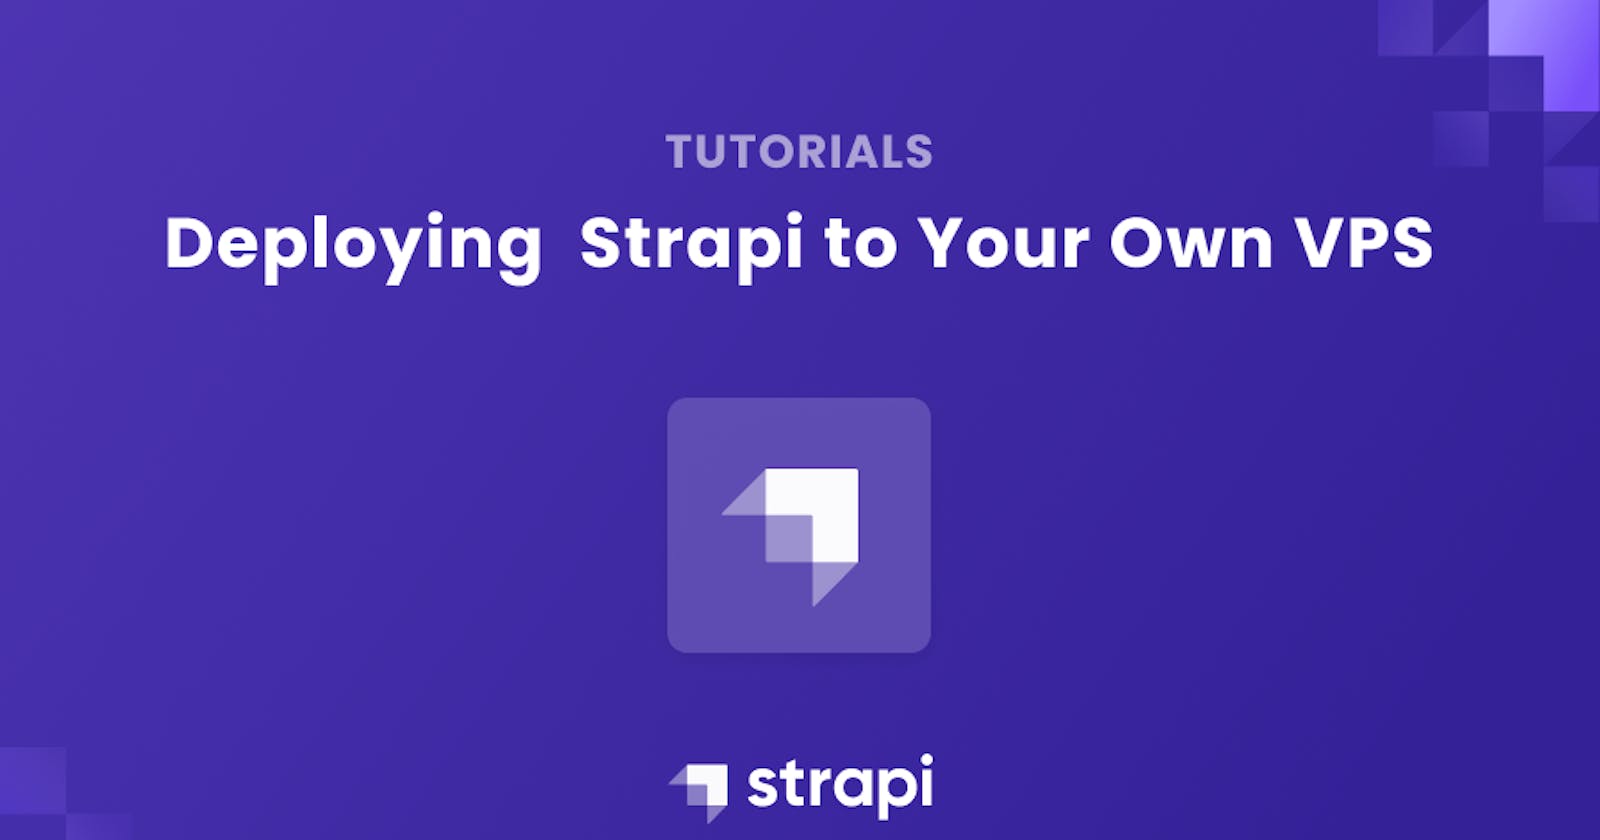 Deploying Strapi to Your Own VPS